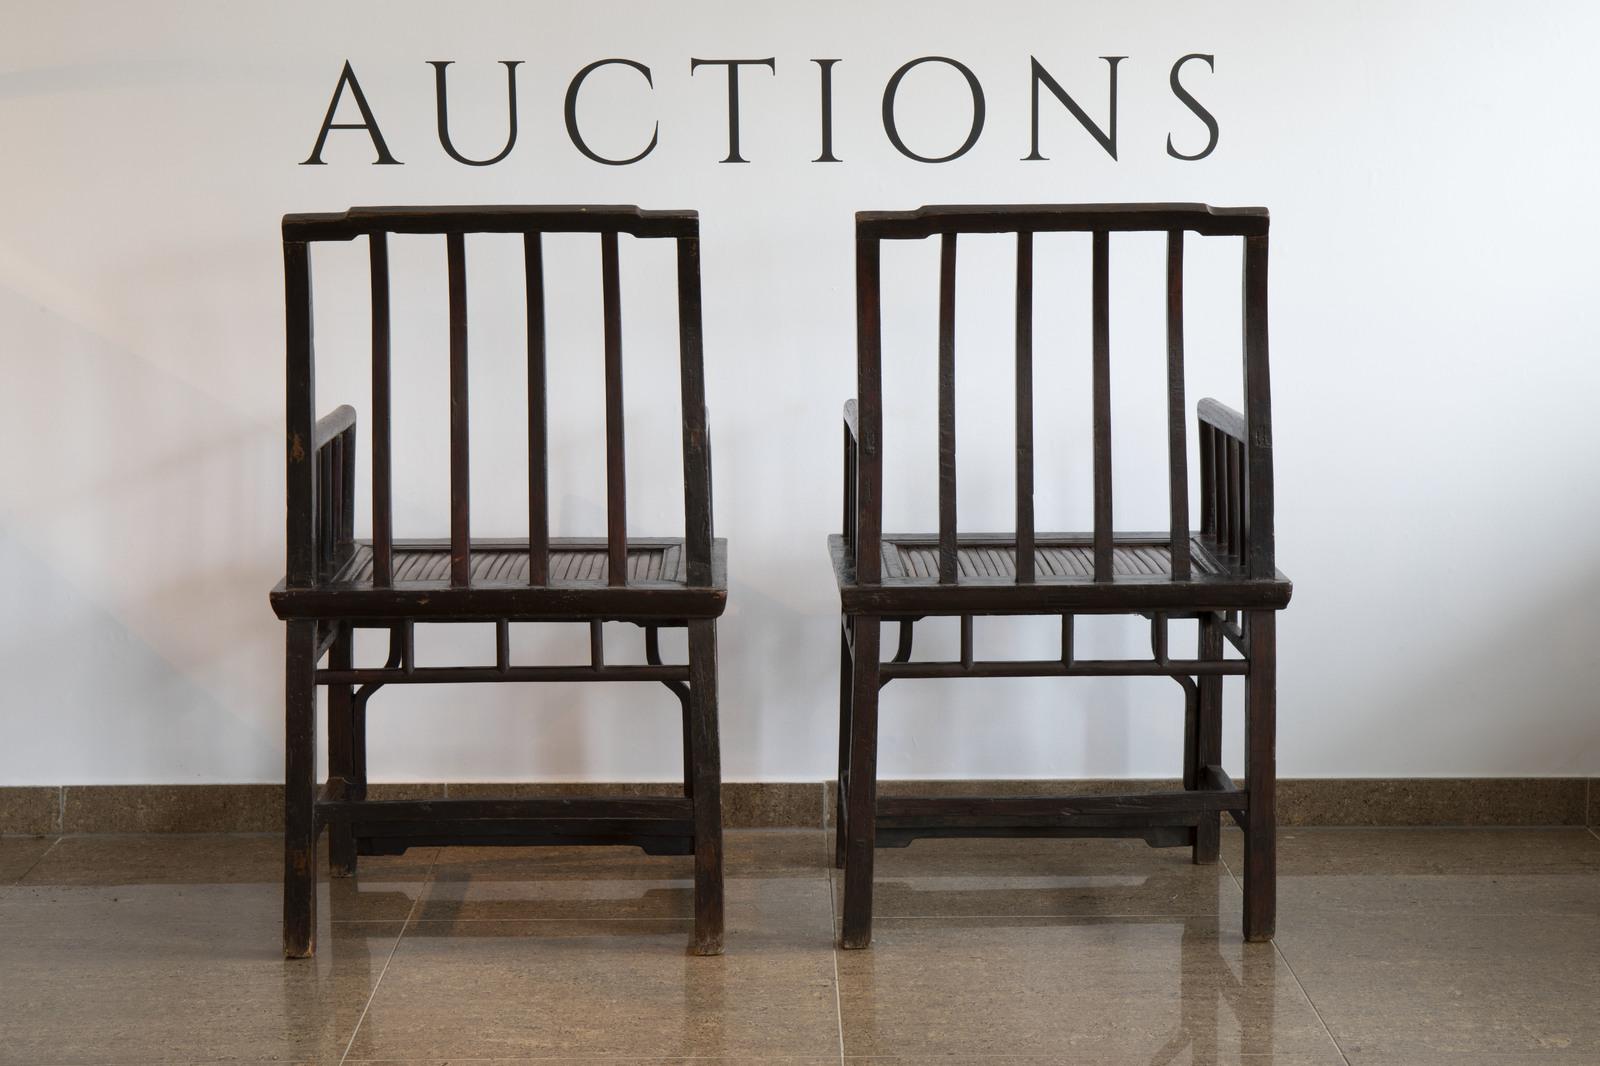 A pair of Chinese lacquered wooden chairs, first half of the 20th C. - Image 4 of 7